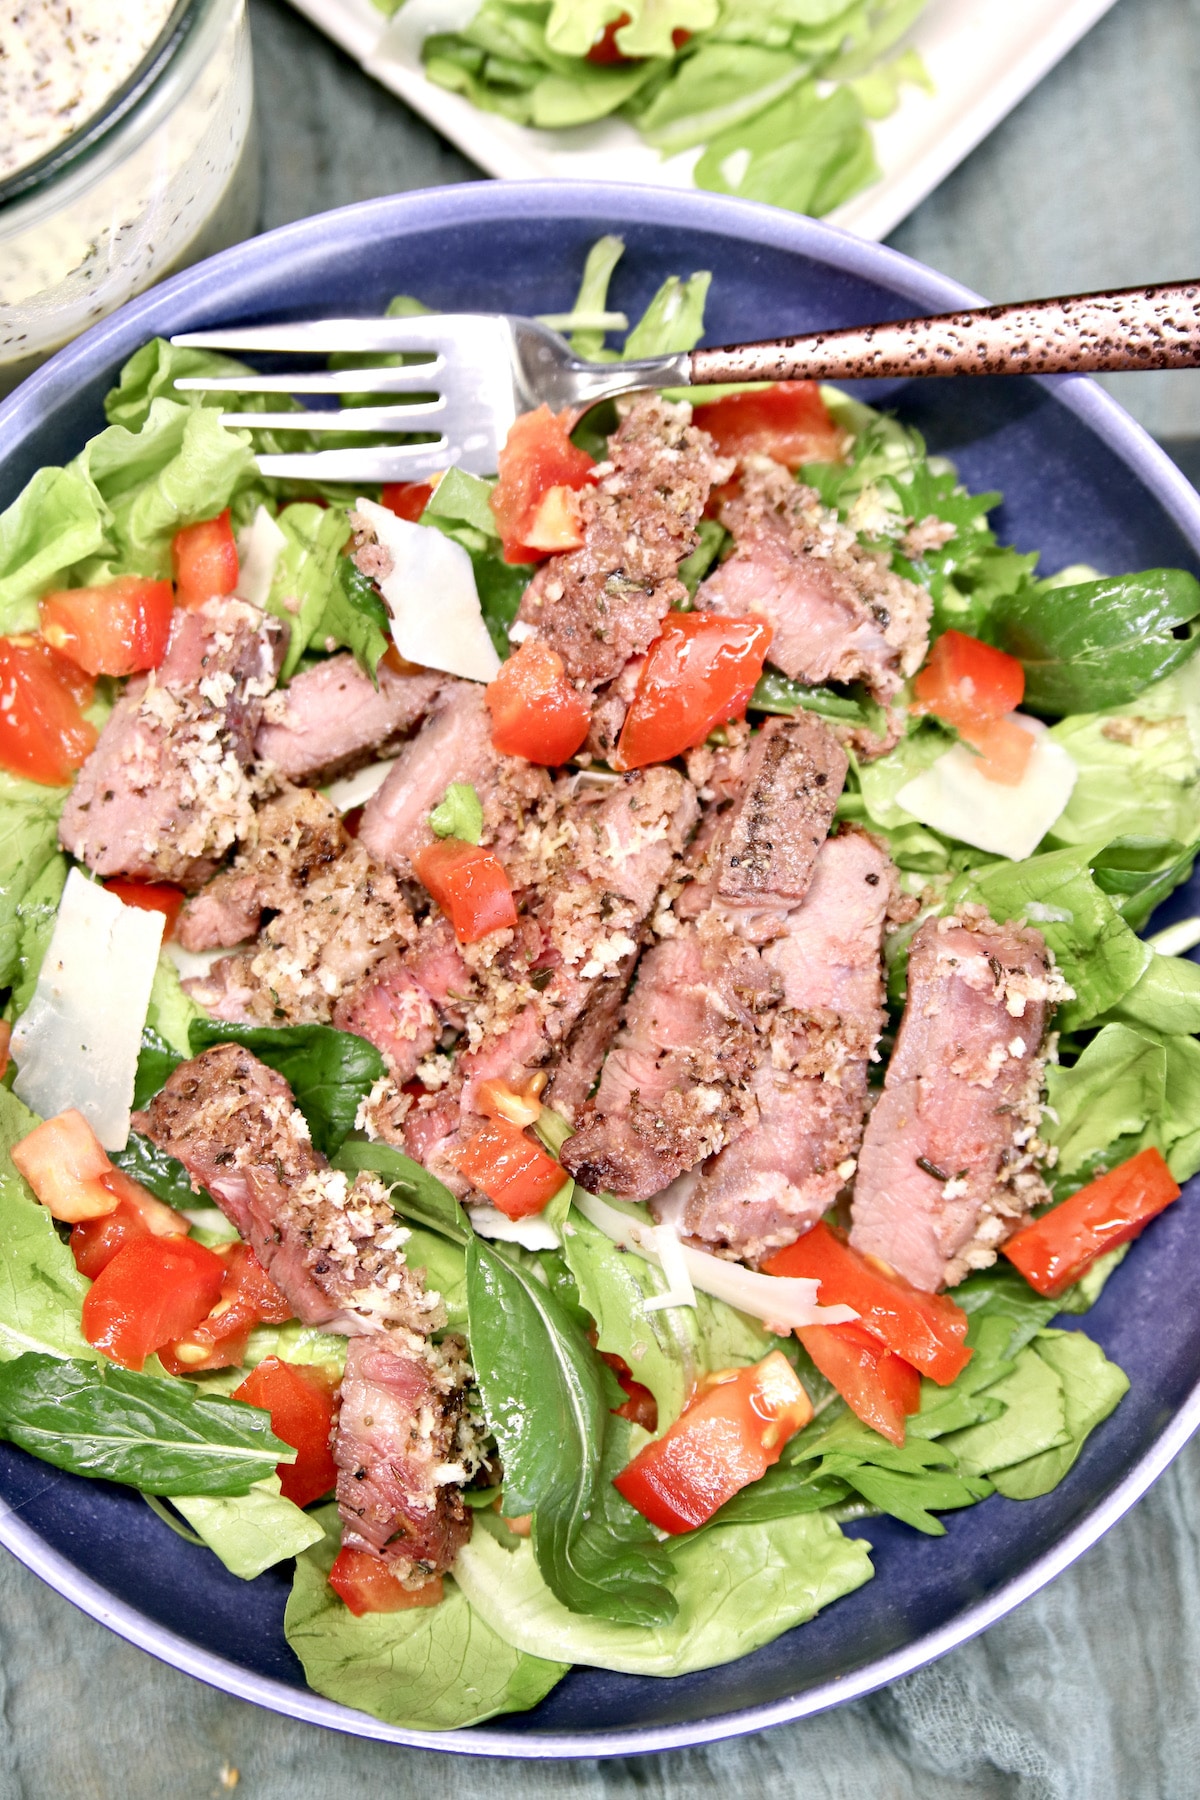 Bowl of salad topped with sliced steak.